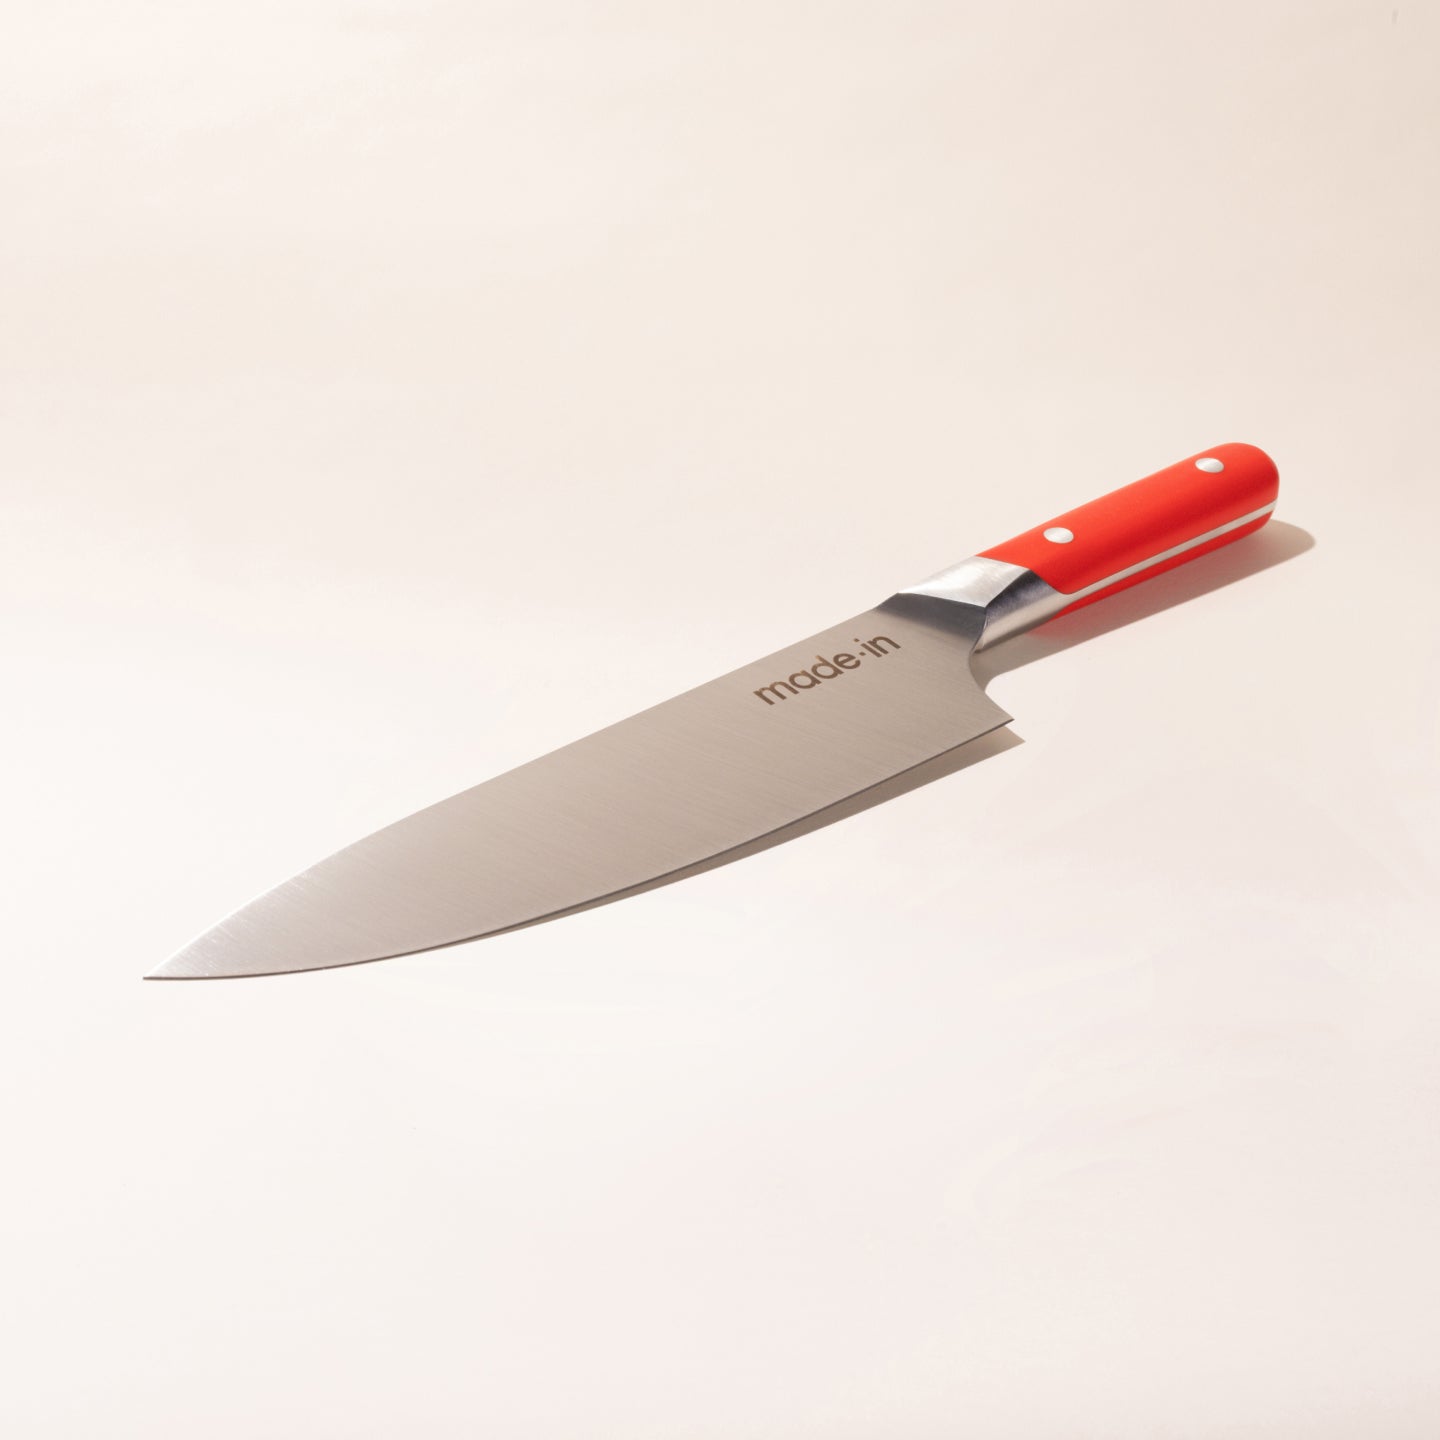 https://cdn.shopify.com/s/files/1/2131/5111/products/Web_P1_Knife_Chef_8in_Red_1x1_Hero-1.jpg?v=1698864593